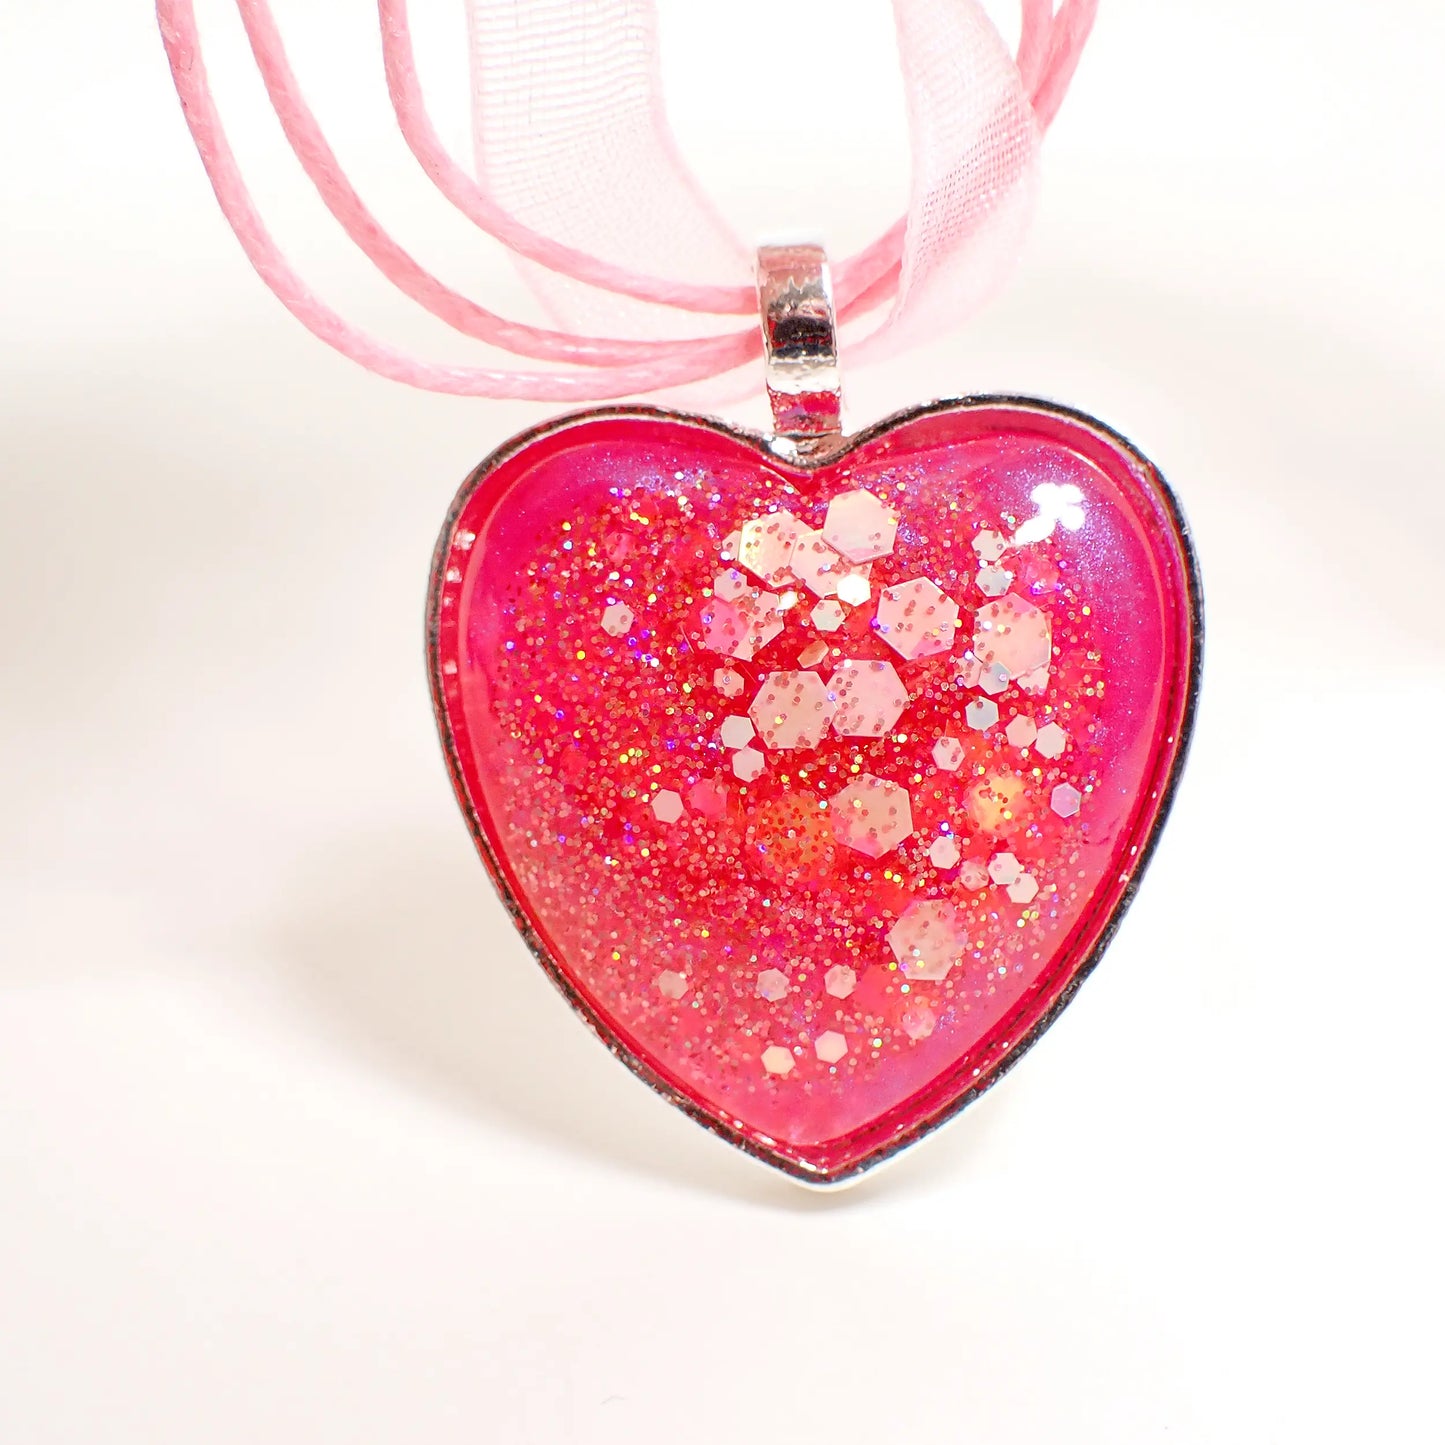 Handmade Pearly Bright Pink Resin Heart Pendant Necklace with Iridescent Glitter, Silver Plated